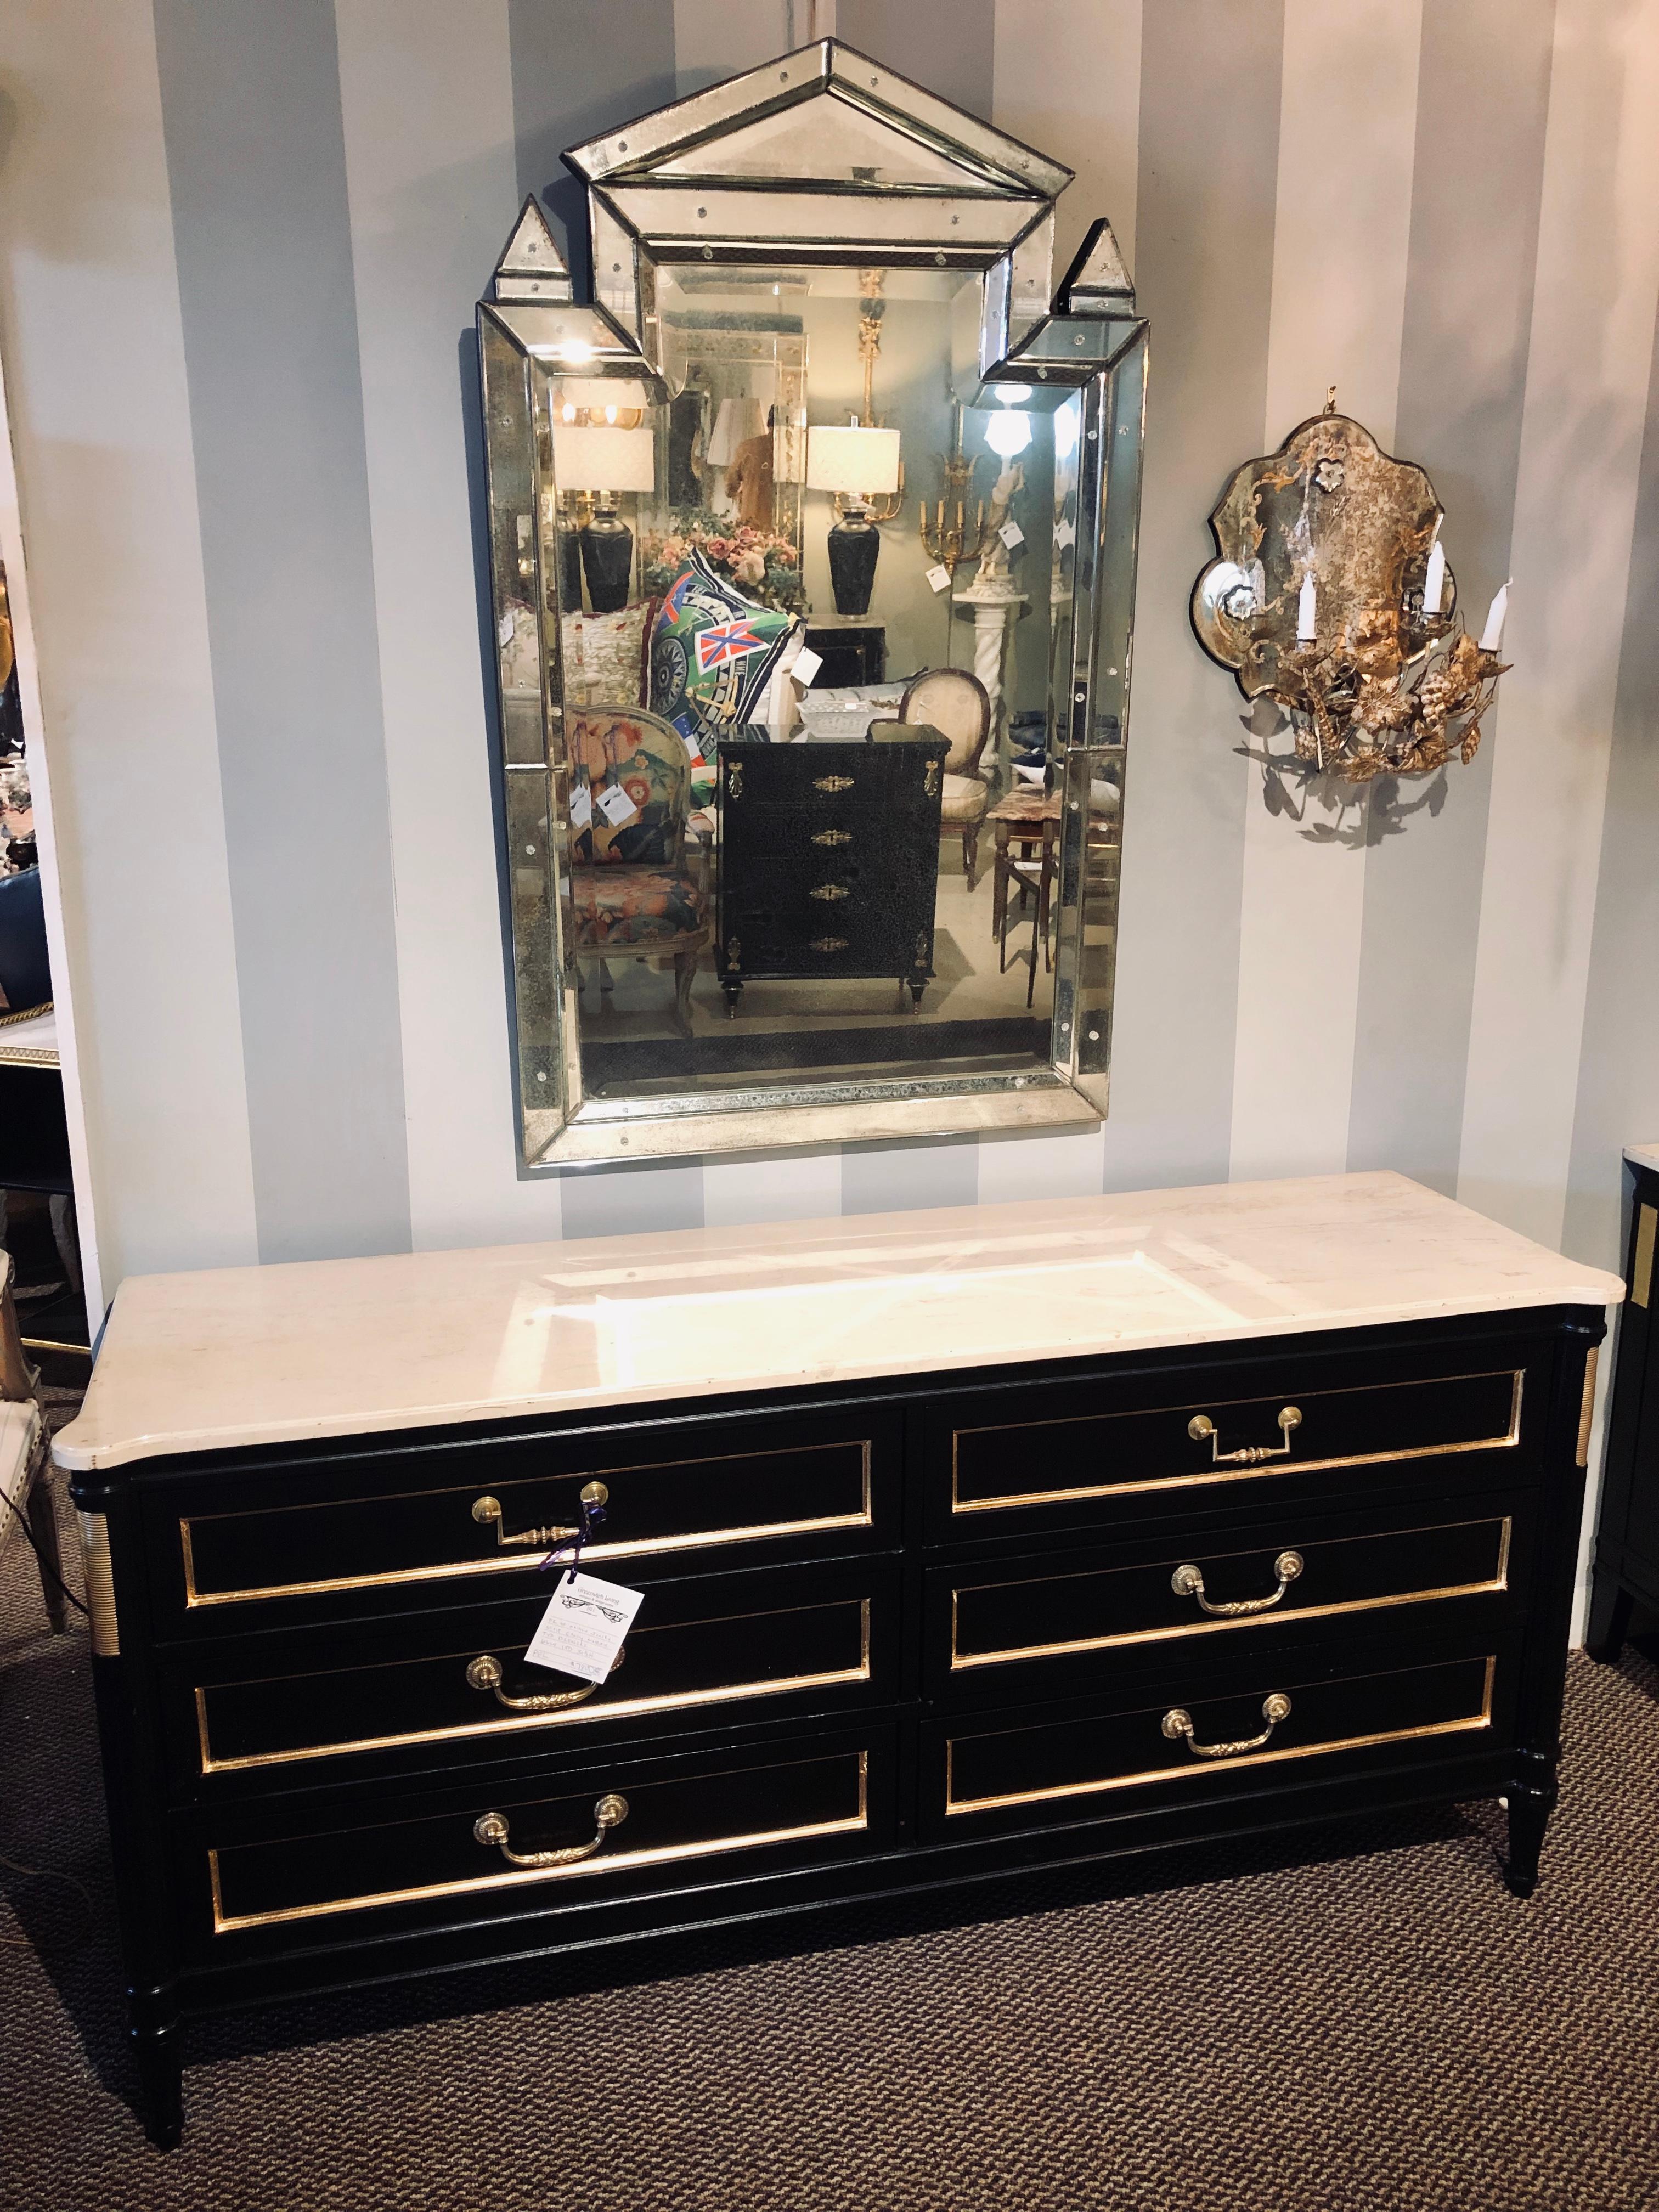 Maison Jansen style ebony marble-top dresser commode chest of drawers. In the Louis XVI style with ebony and bronze adorned decoration this stunning palatial server or dresser is multi functional and can be used in many settings. Having the Maison